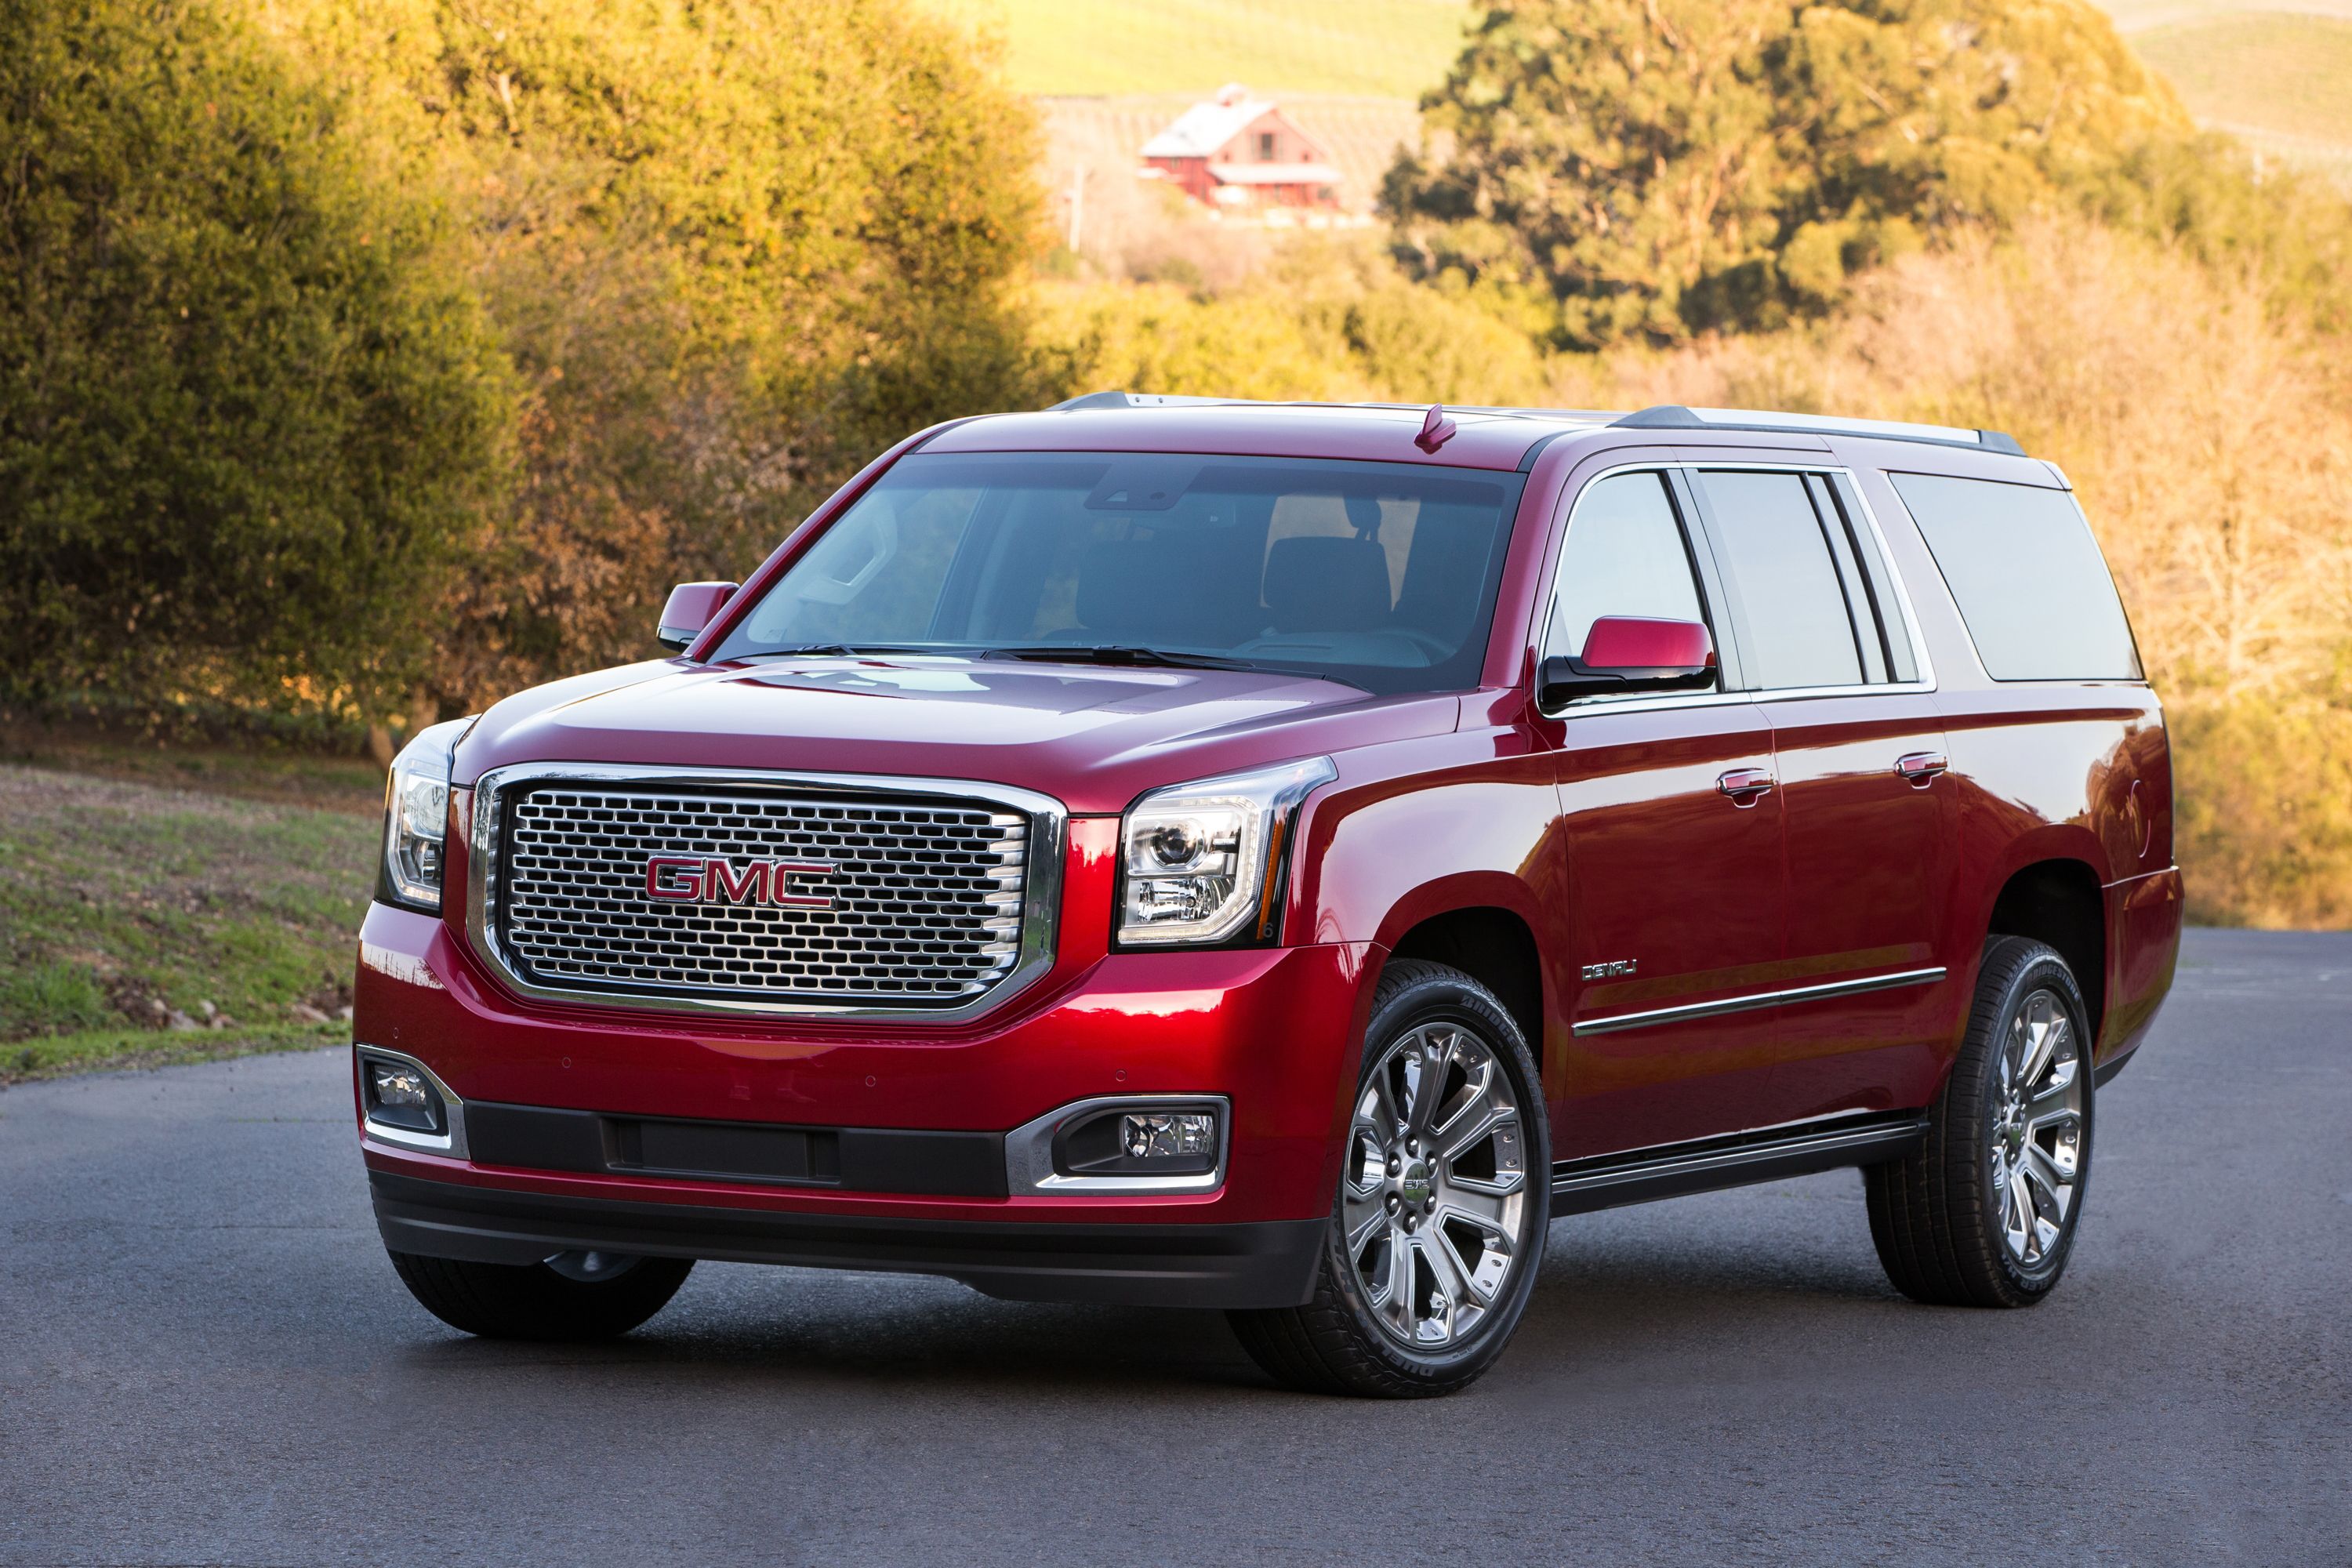 Cherry Red 2016 GMC Yukon outdoors in the forest